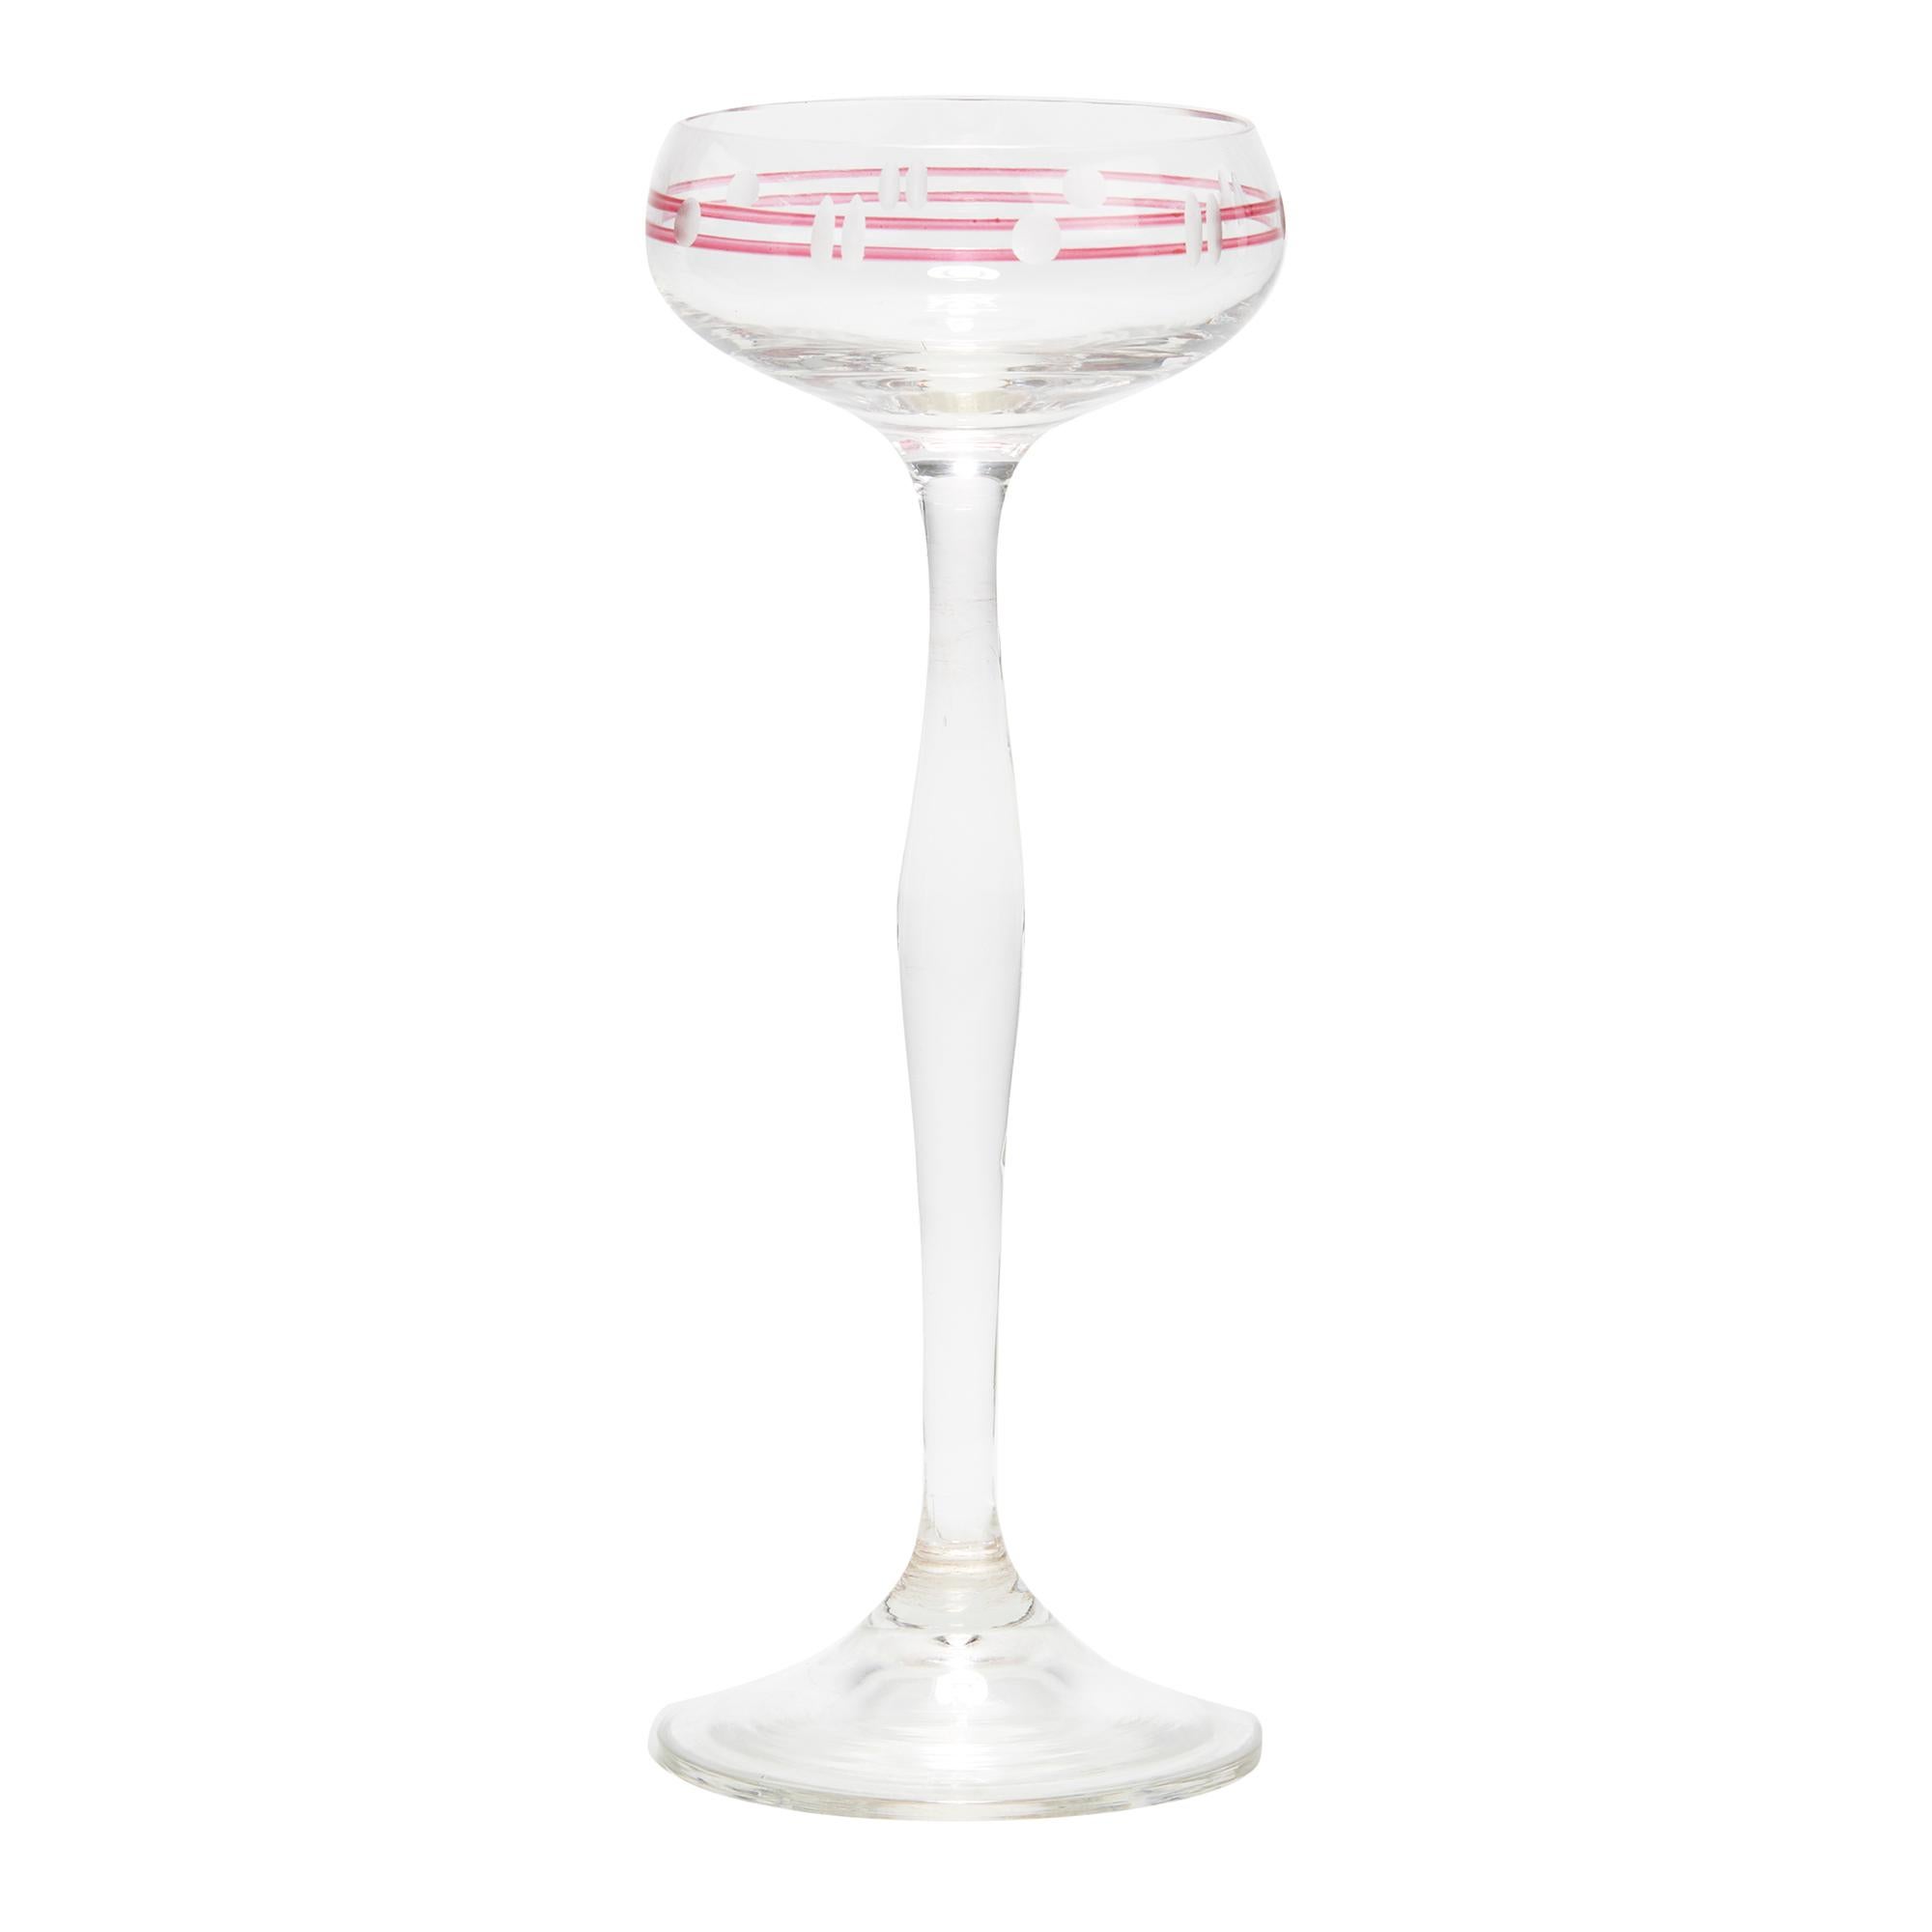 A stylish set eight Art Nouveau liqueur glasses with open rounded bowls with acid etched and engraved designs set within two cranberry enameled bands. The bowls are mounted on a tall shaped stem with a wide rounded foot of varying diameter. The